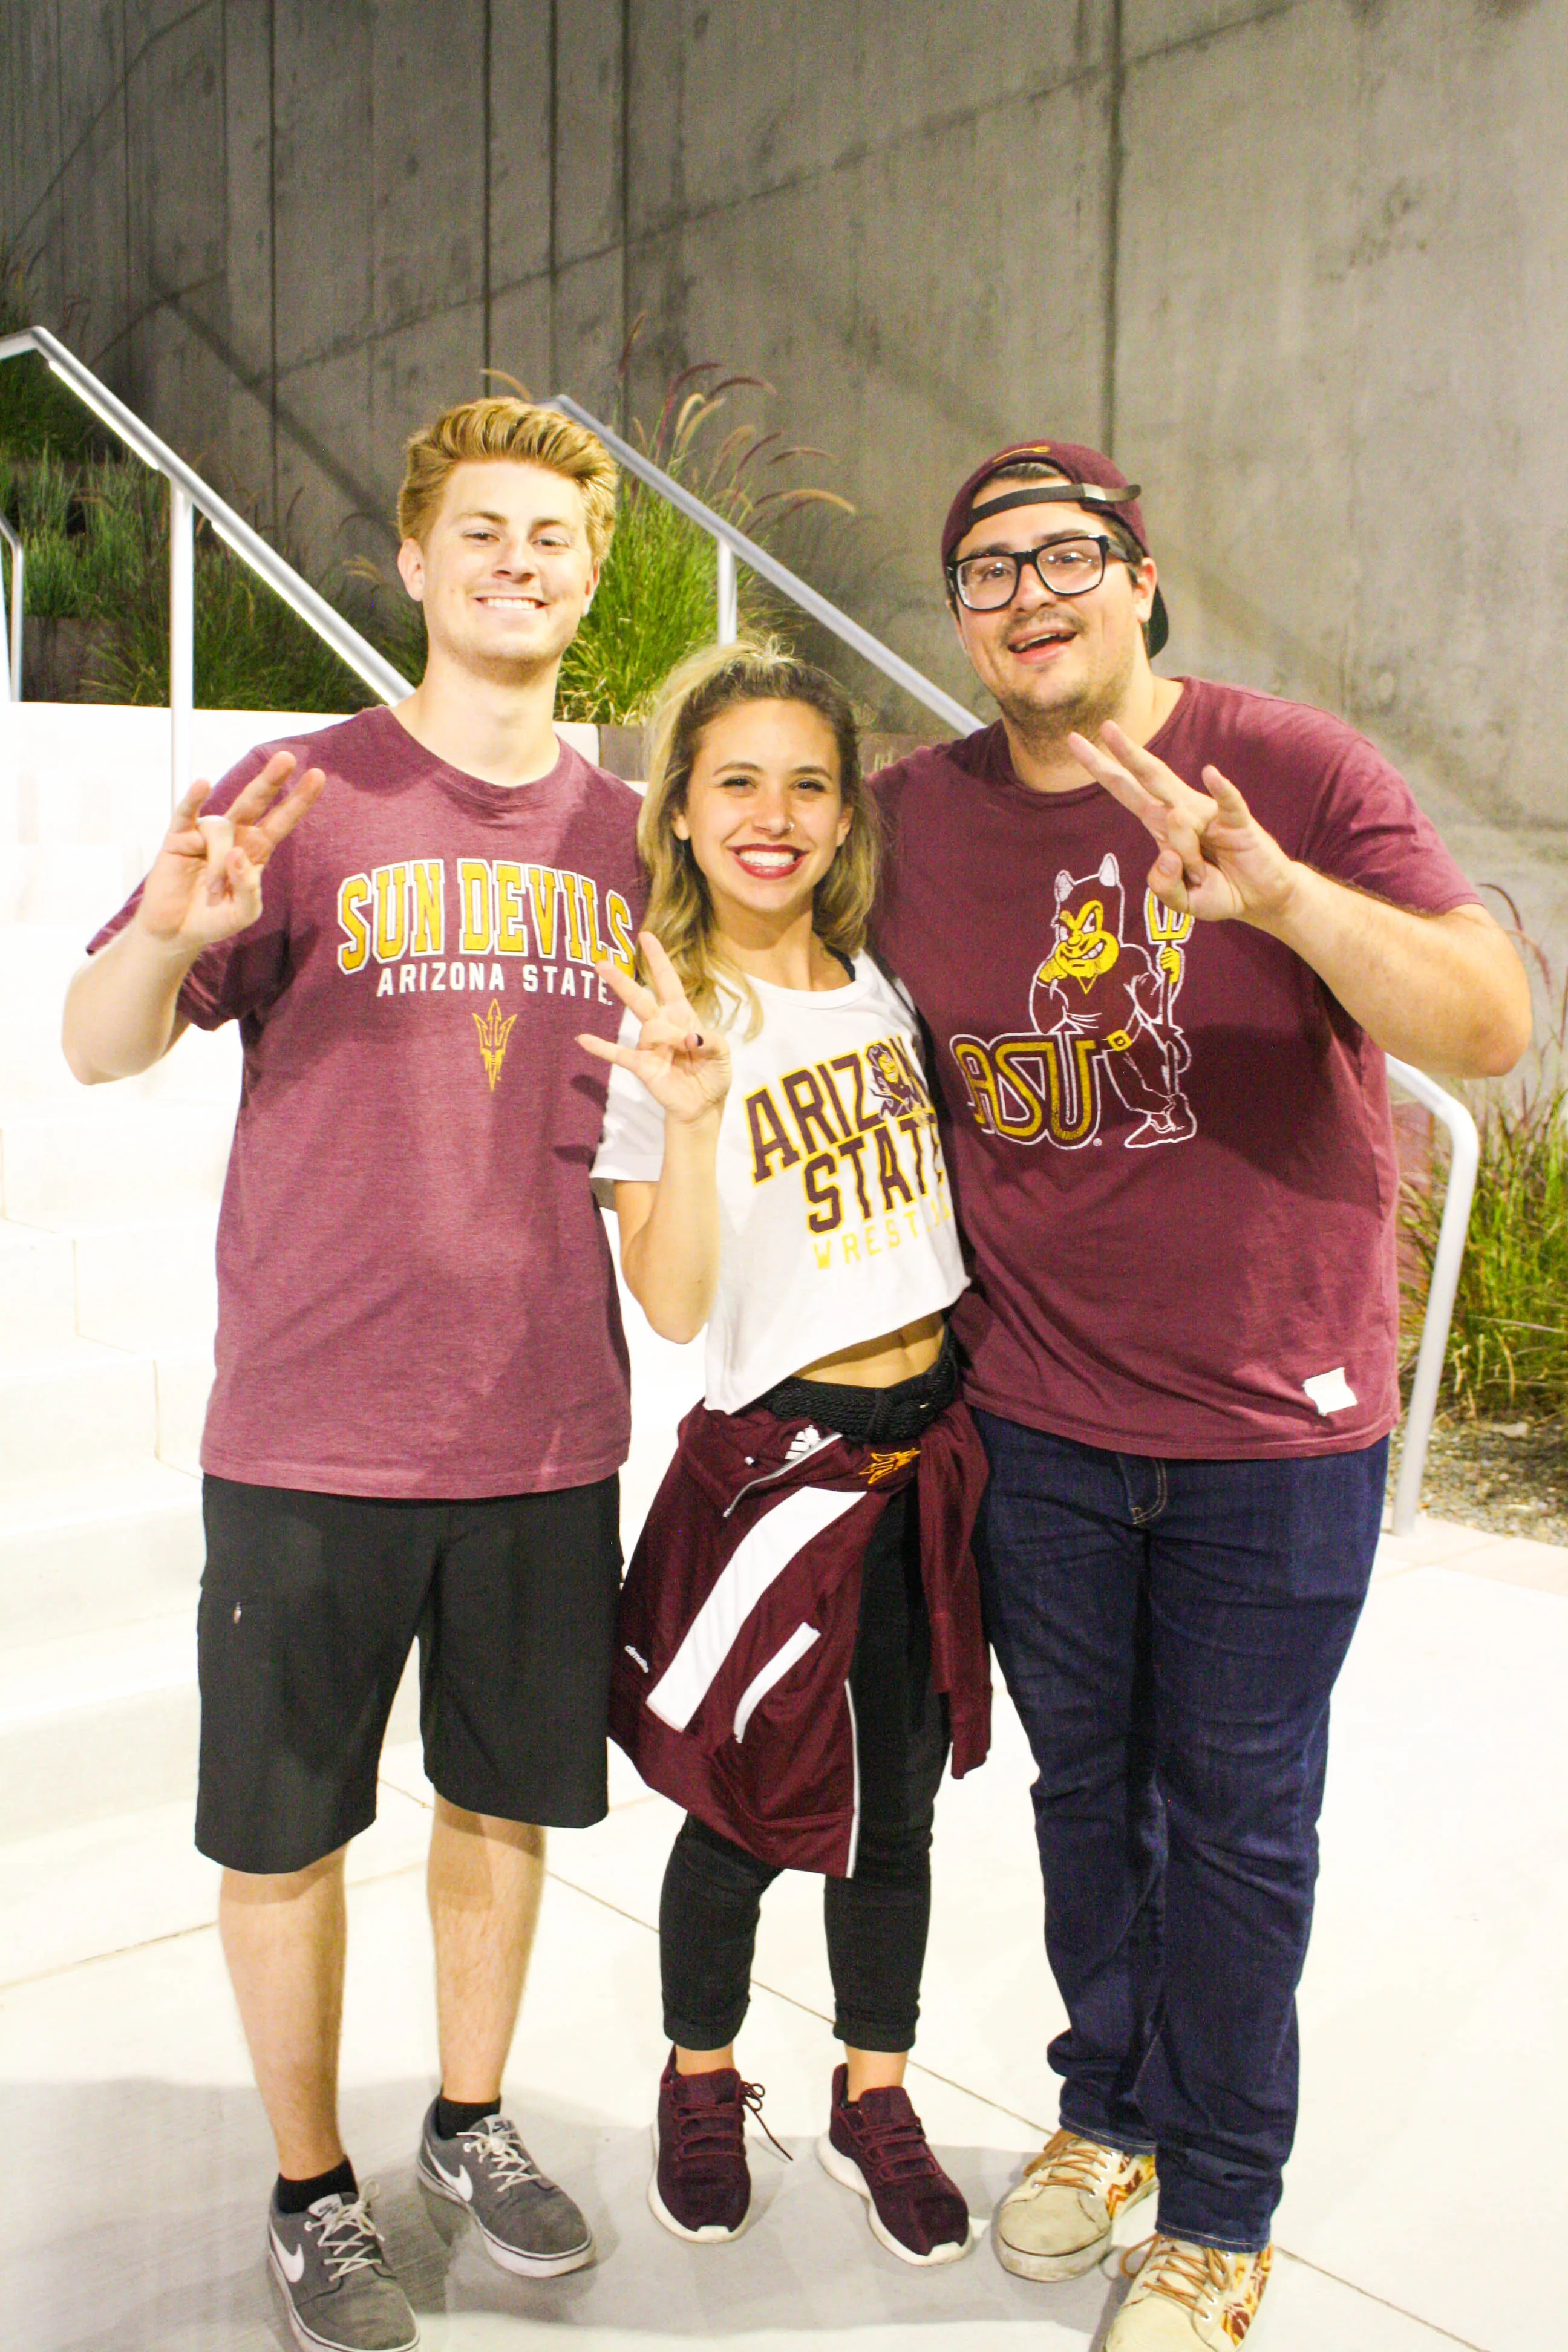 ASU fans. The games are so fun - just as any of the ASU fans!